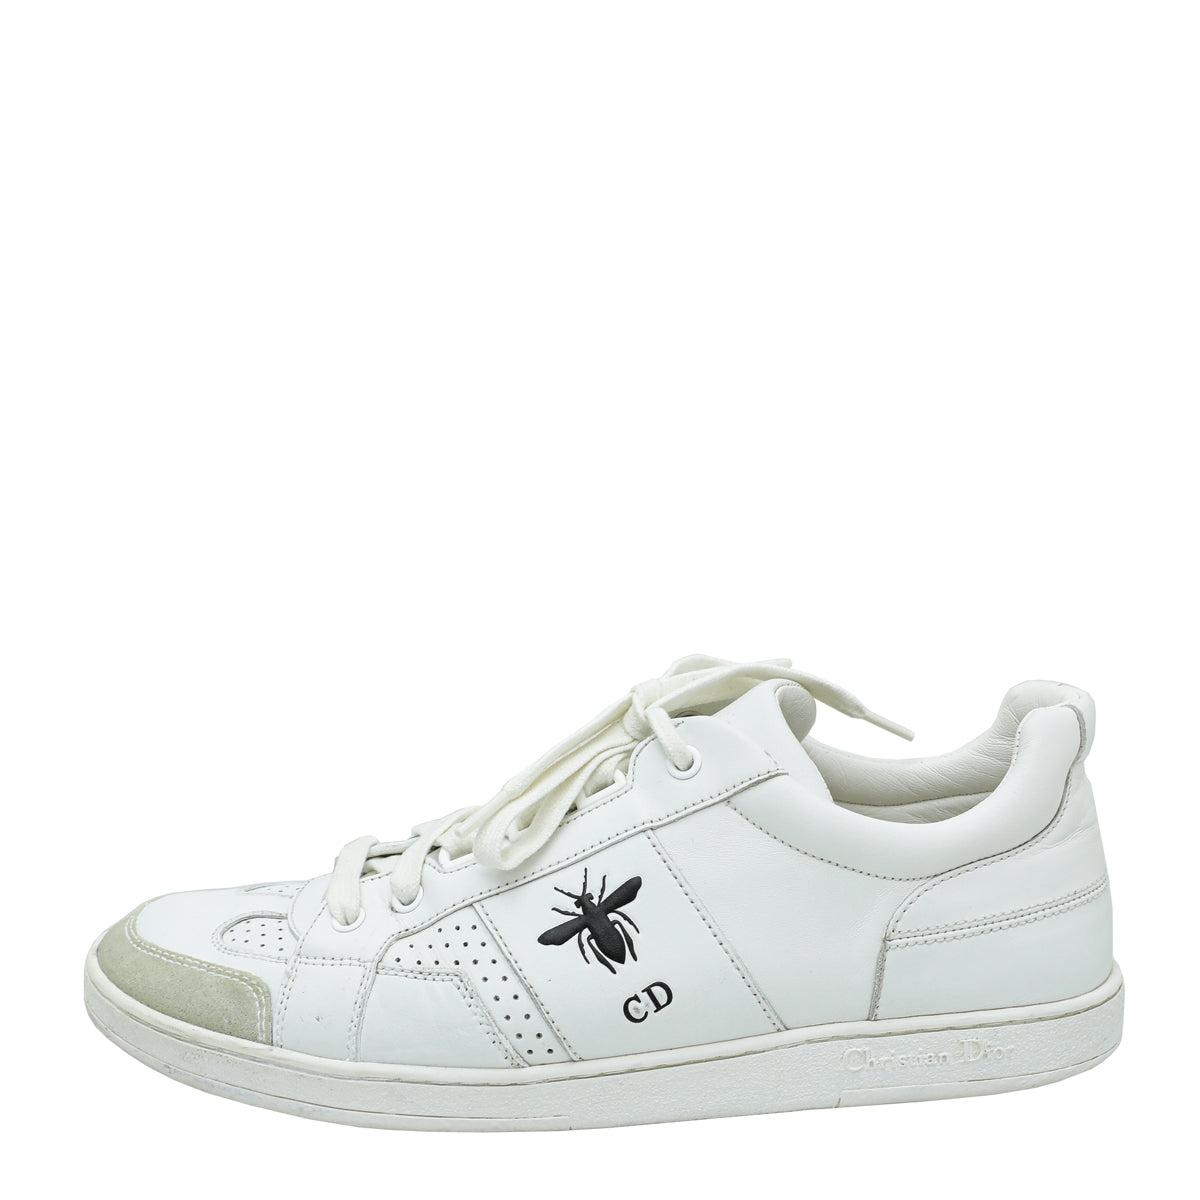 Christian Dior White D Bee Low Top Sneakers 39